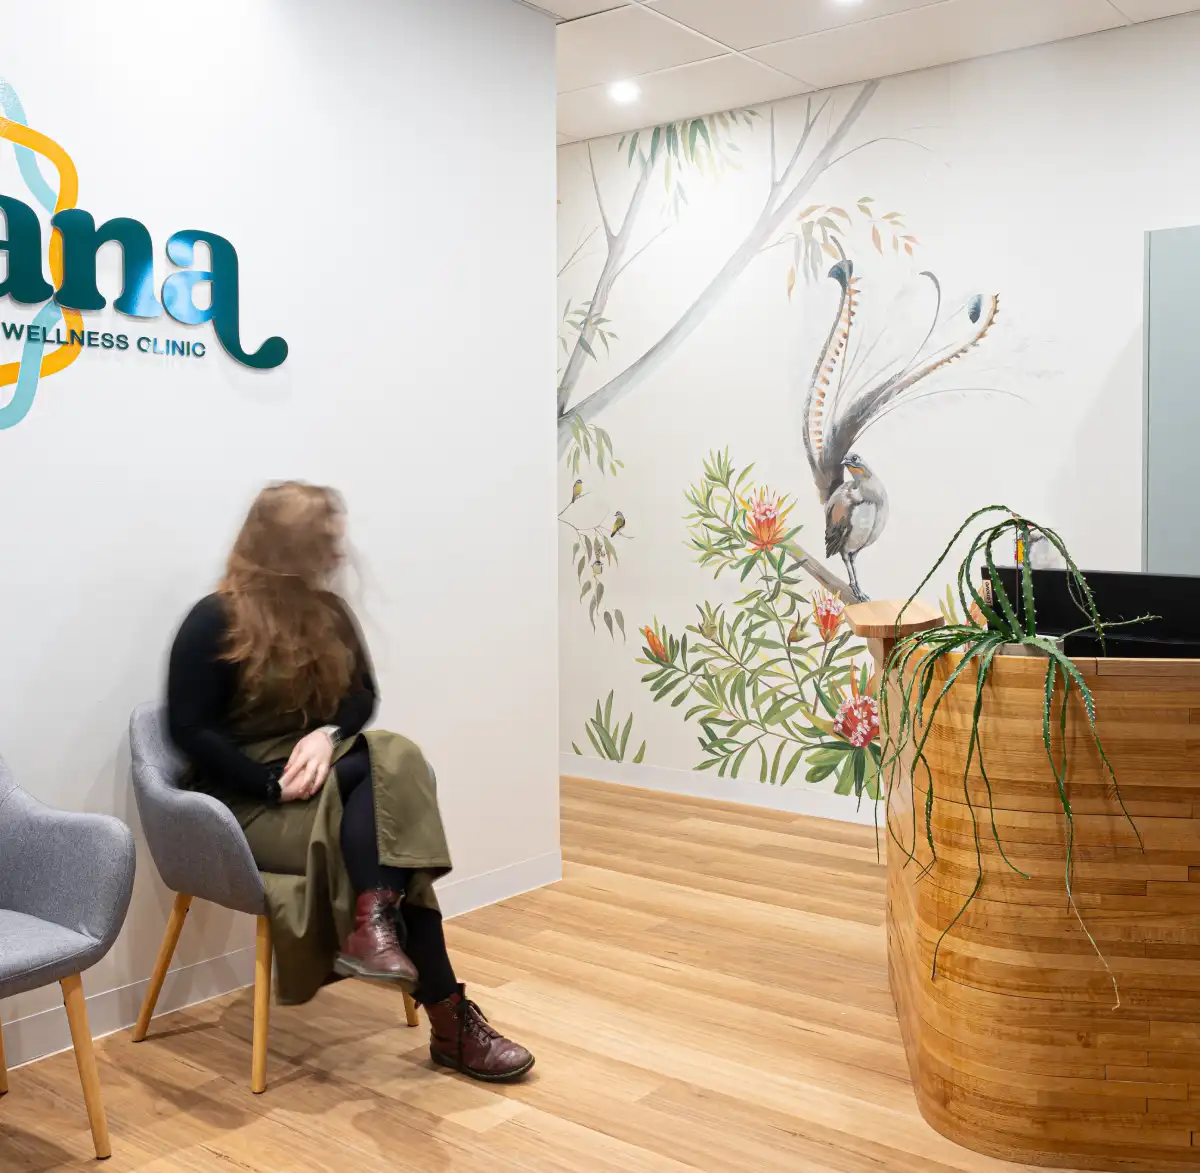 Featured image for “Sana Health and Wellness Clinic”